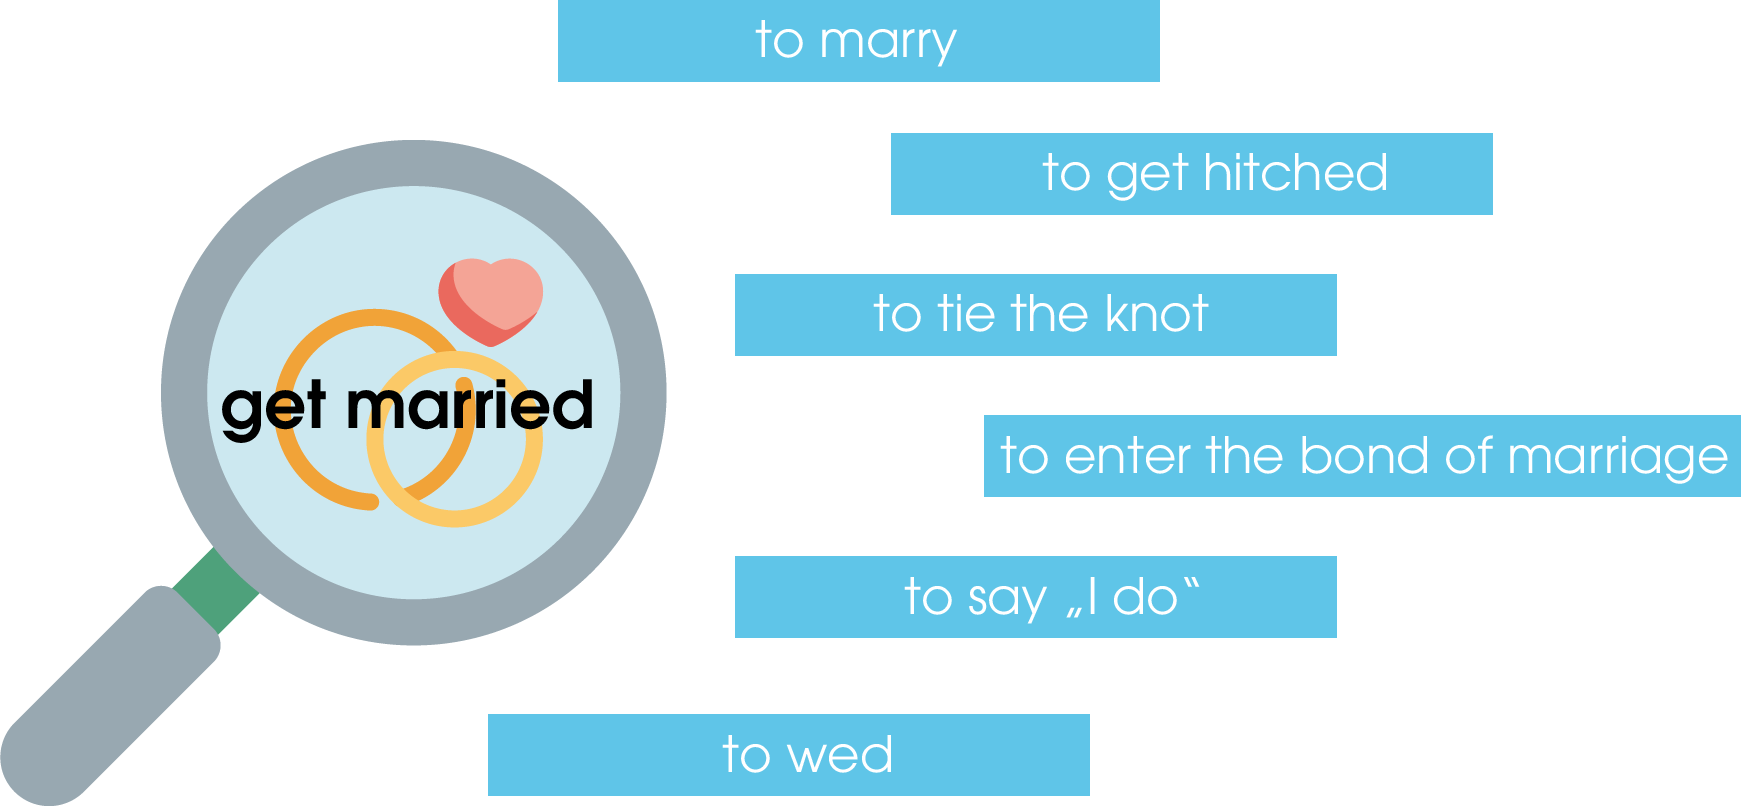 Synonyms are words that all have the same meaning. So you can represent what you want to express with many different words or phrases. Marry, for example, is the same as "get hitched," "say yes," or „to wed“.